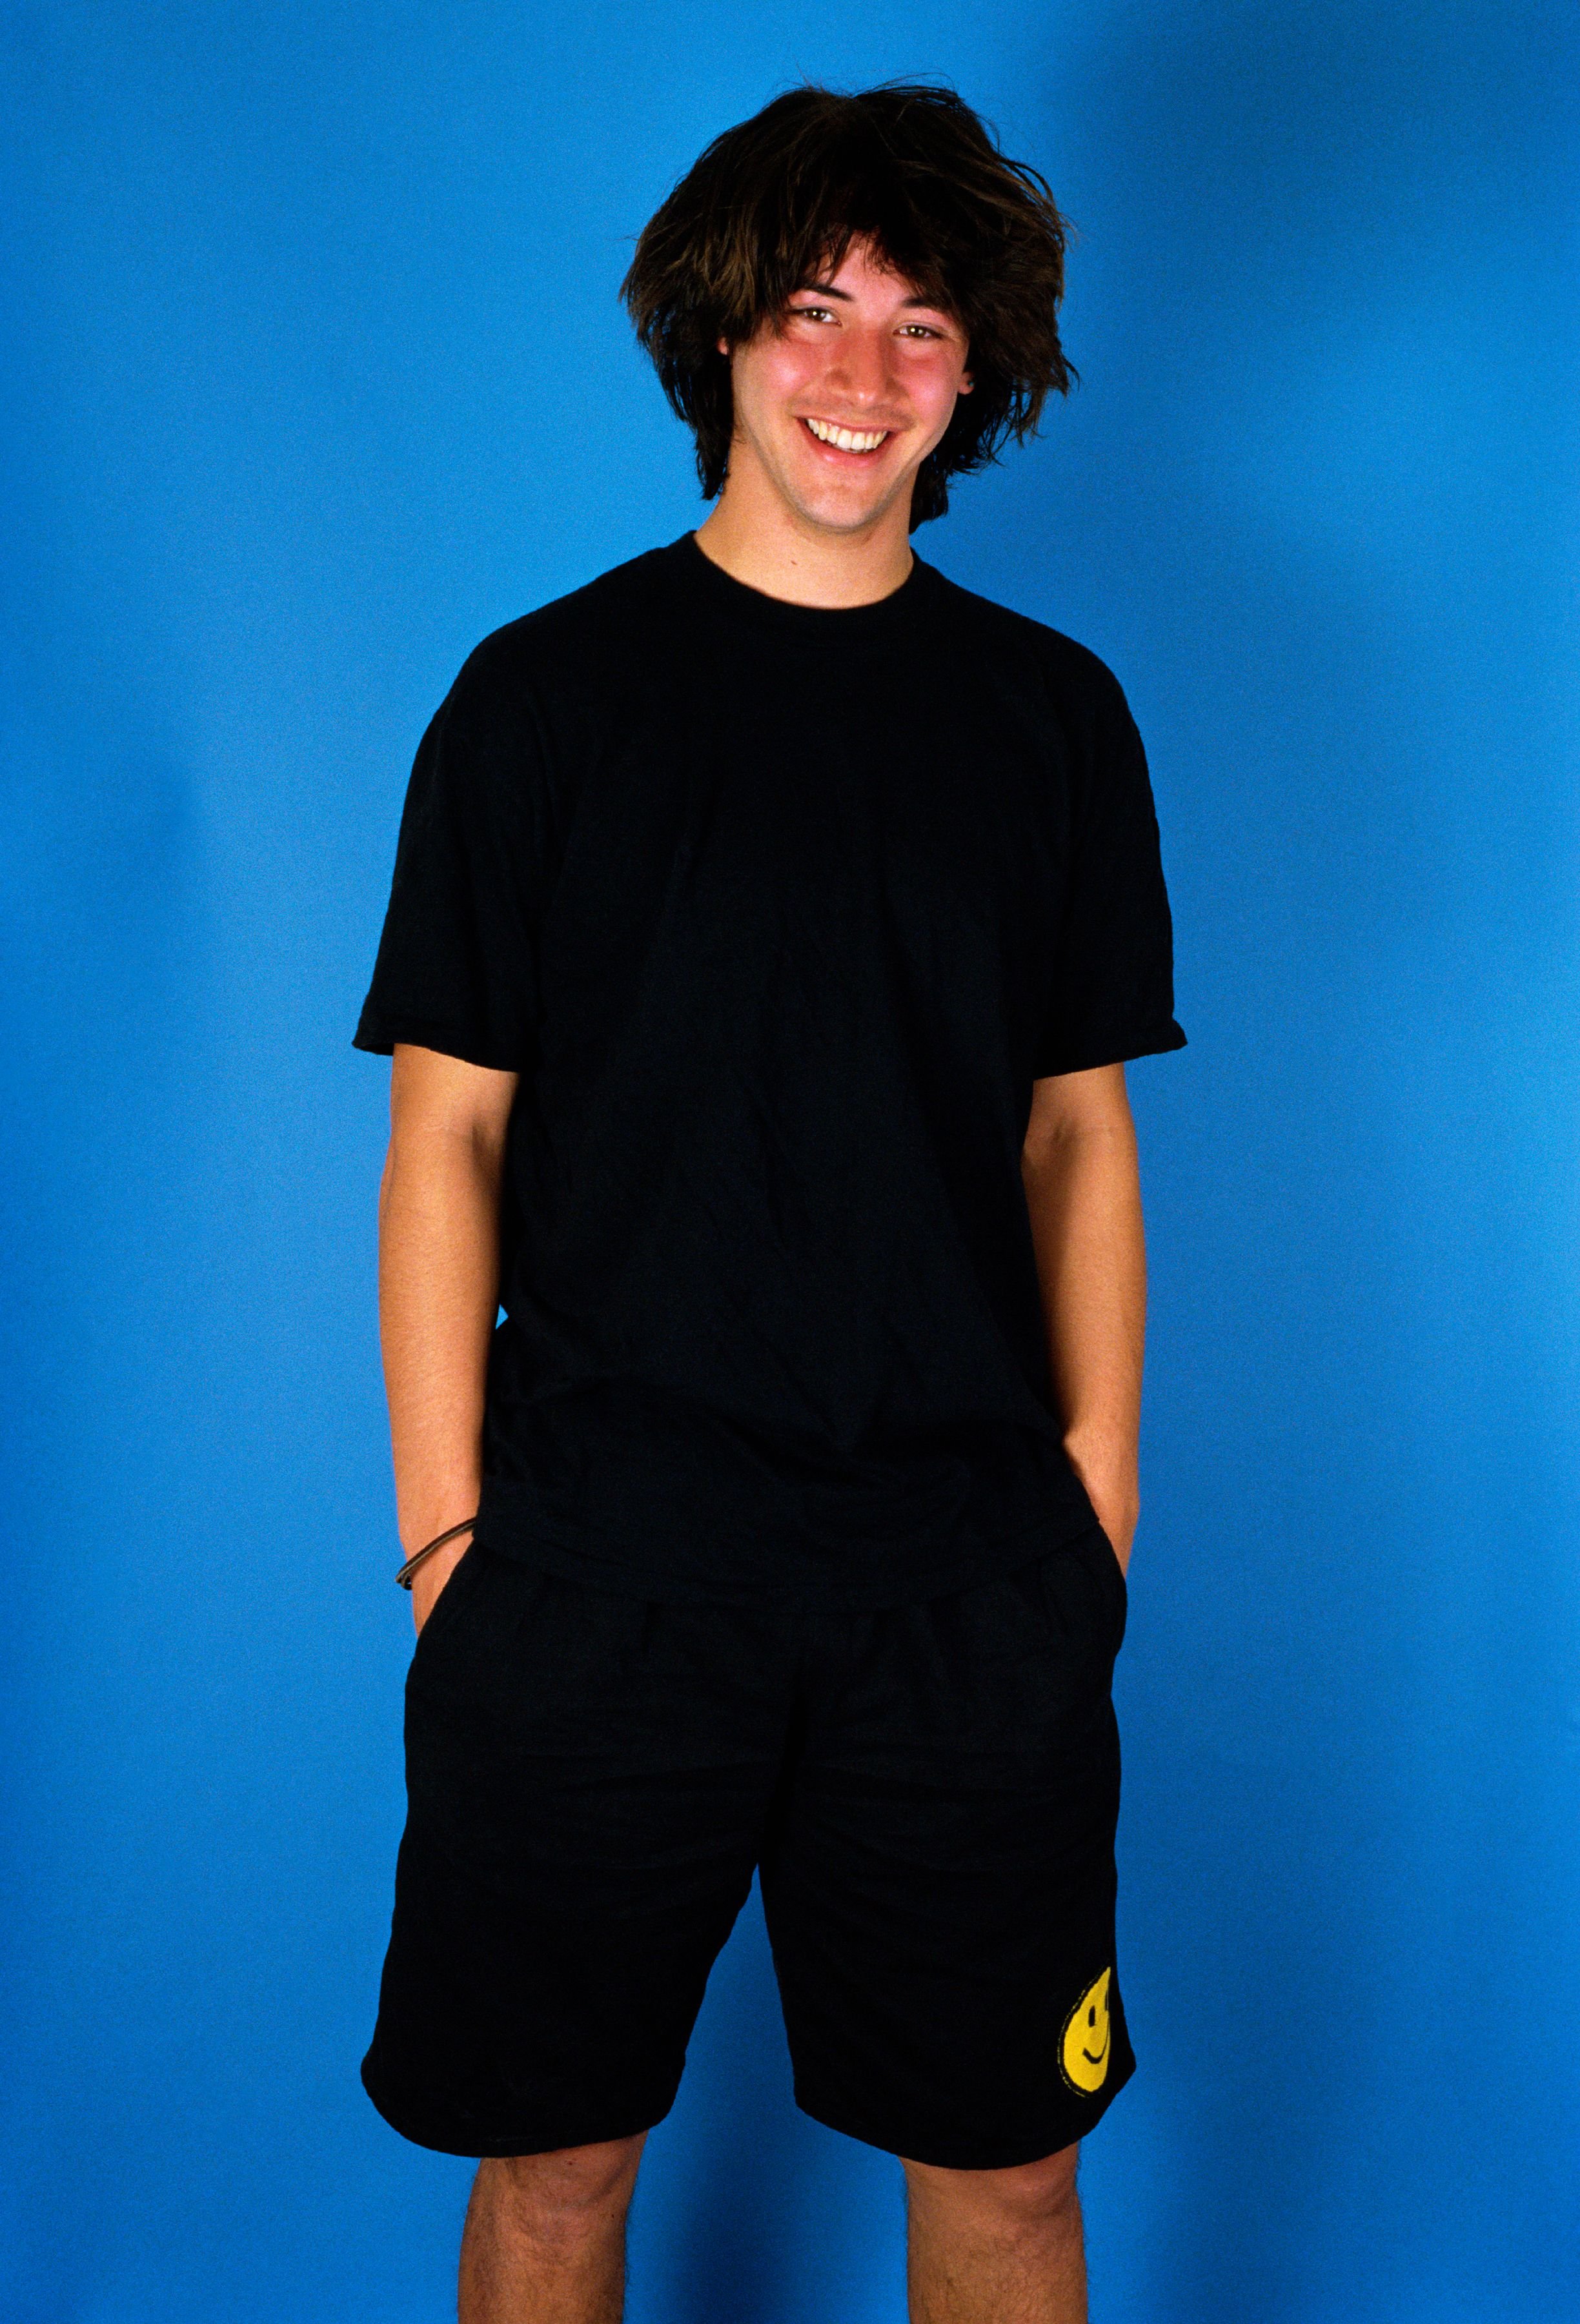 Keanu Reeves poses during a 1987 photo session in West Hollywood, California promoting "Bill & Ted's Excellent Adventure" | Photo: Getty Images